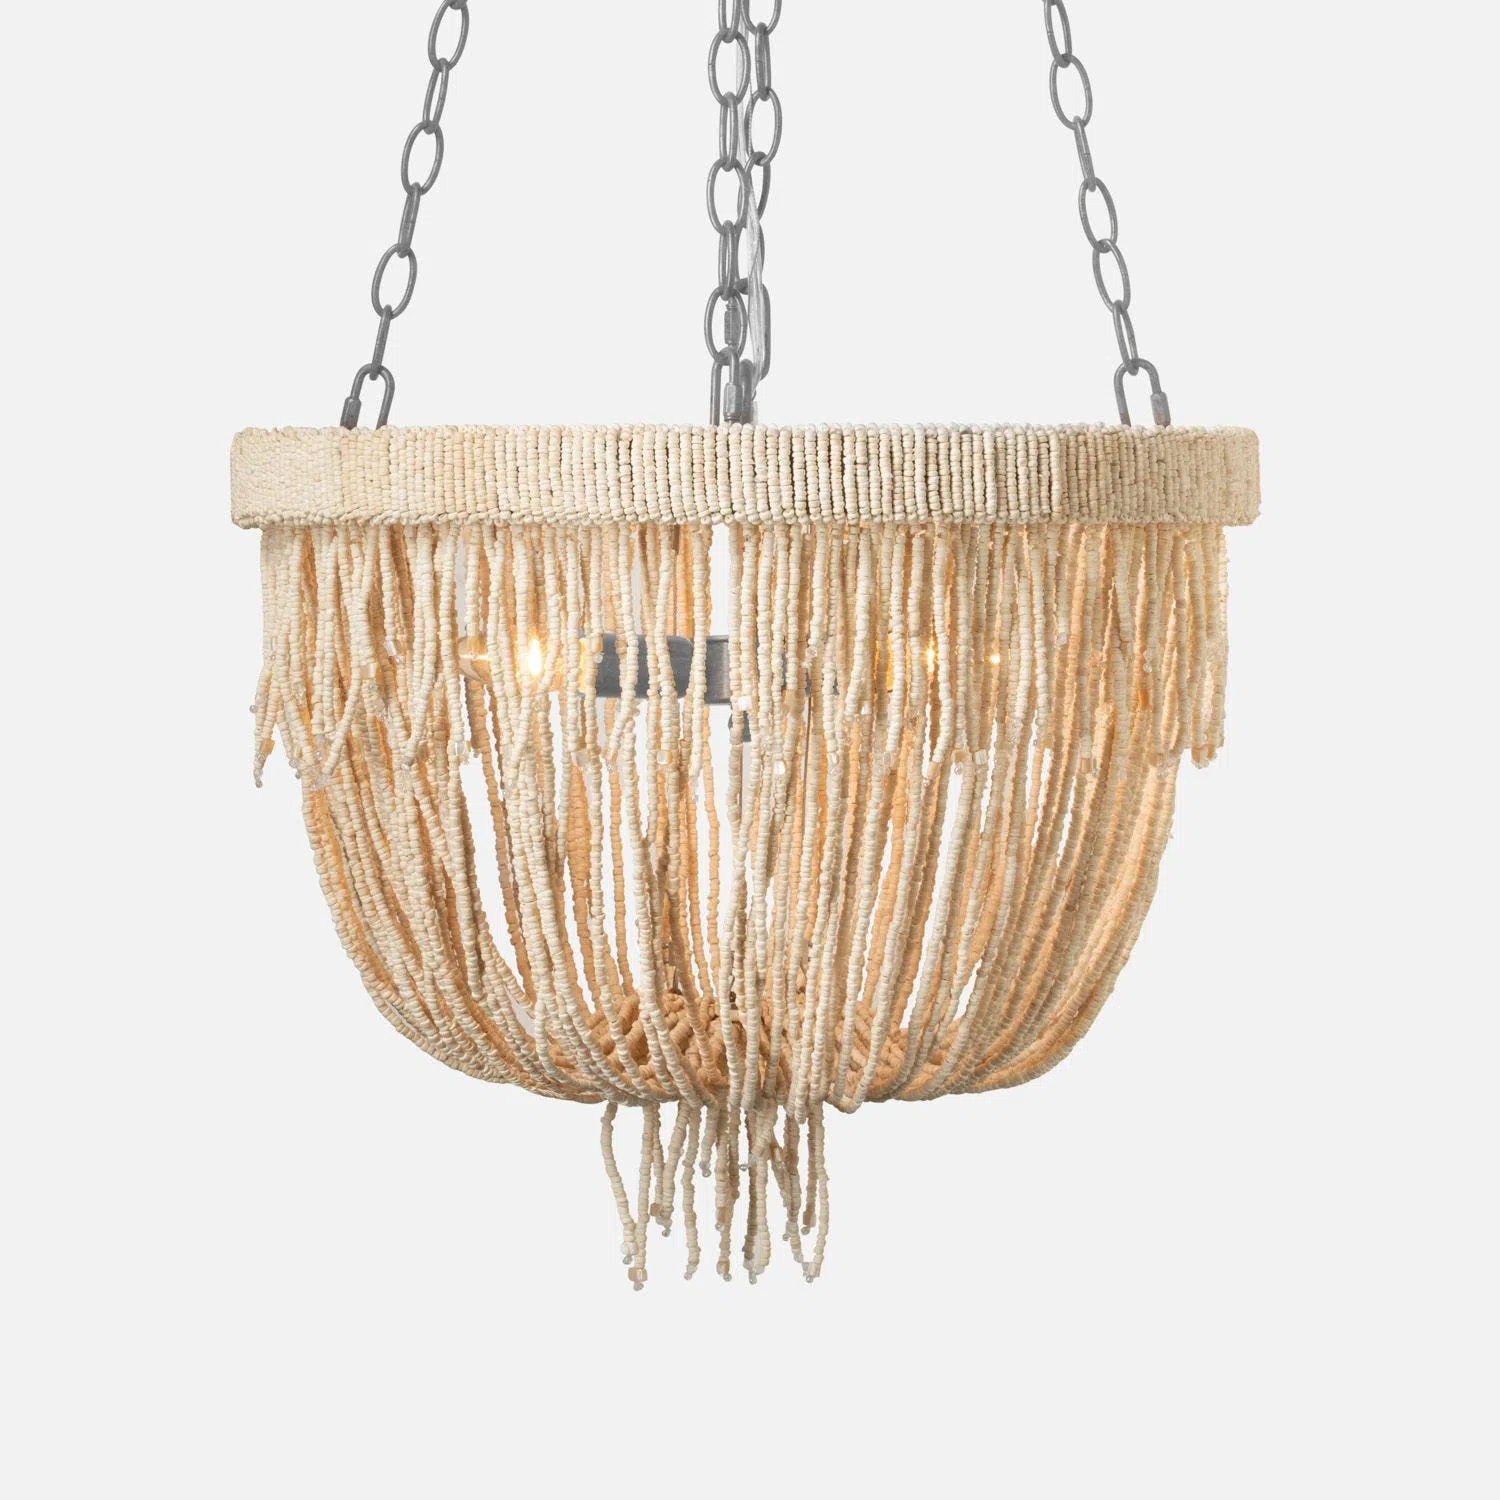 Made Goods Carmen 3-Light 19D x 16H Natural Coco Wood Beads/Silver Metal  Chandelier